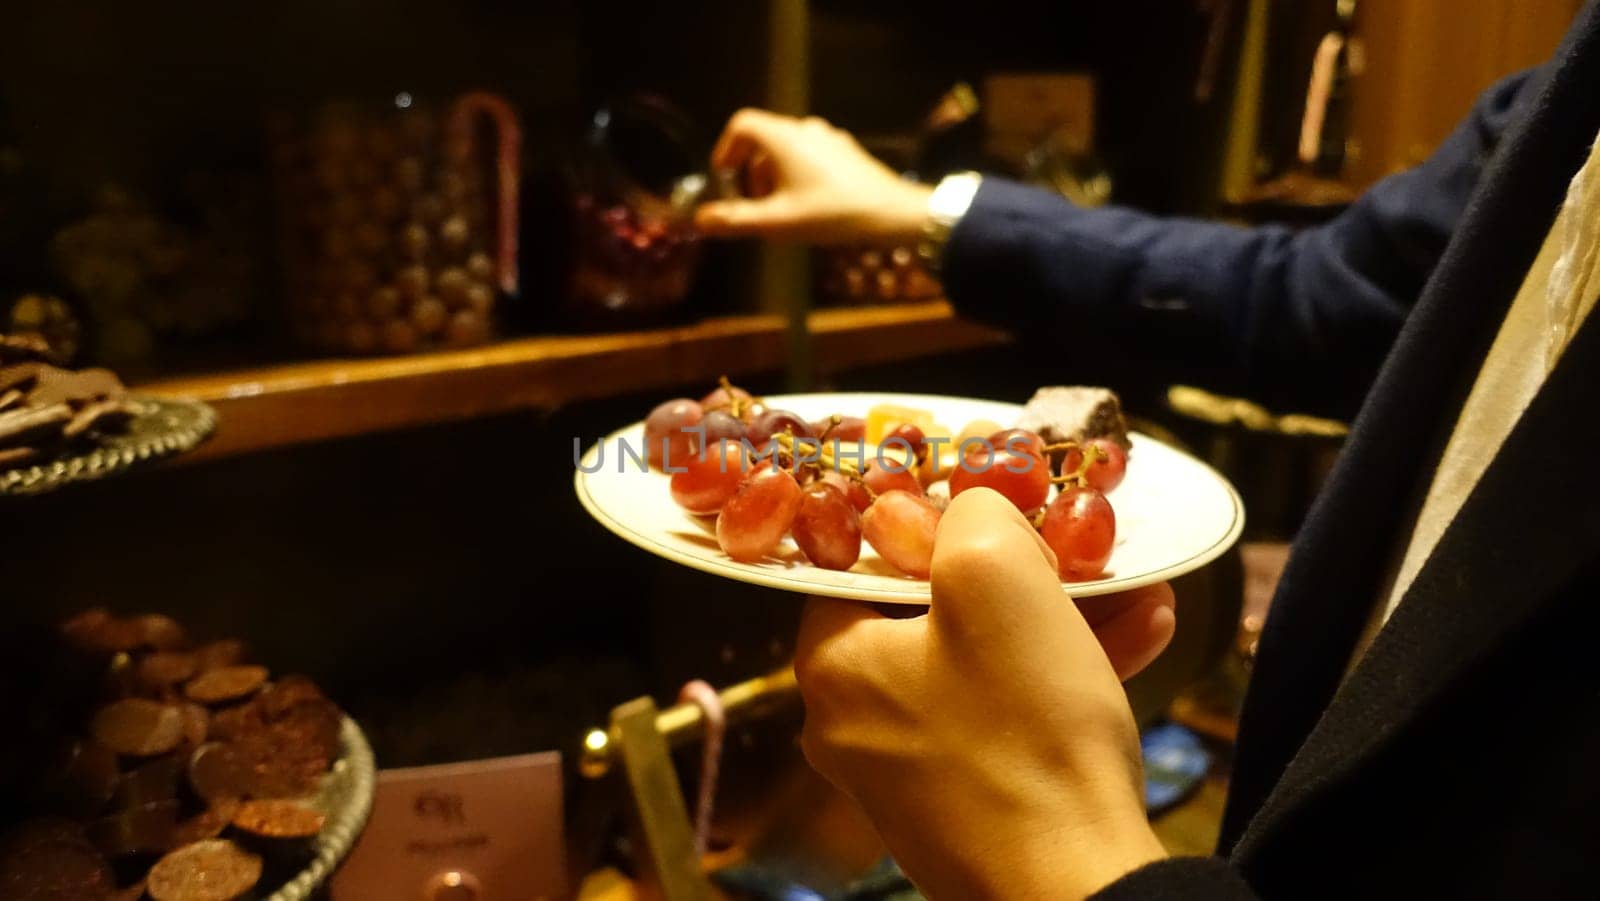 A person is holding a small plate with grapes and a piece of cheese.